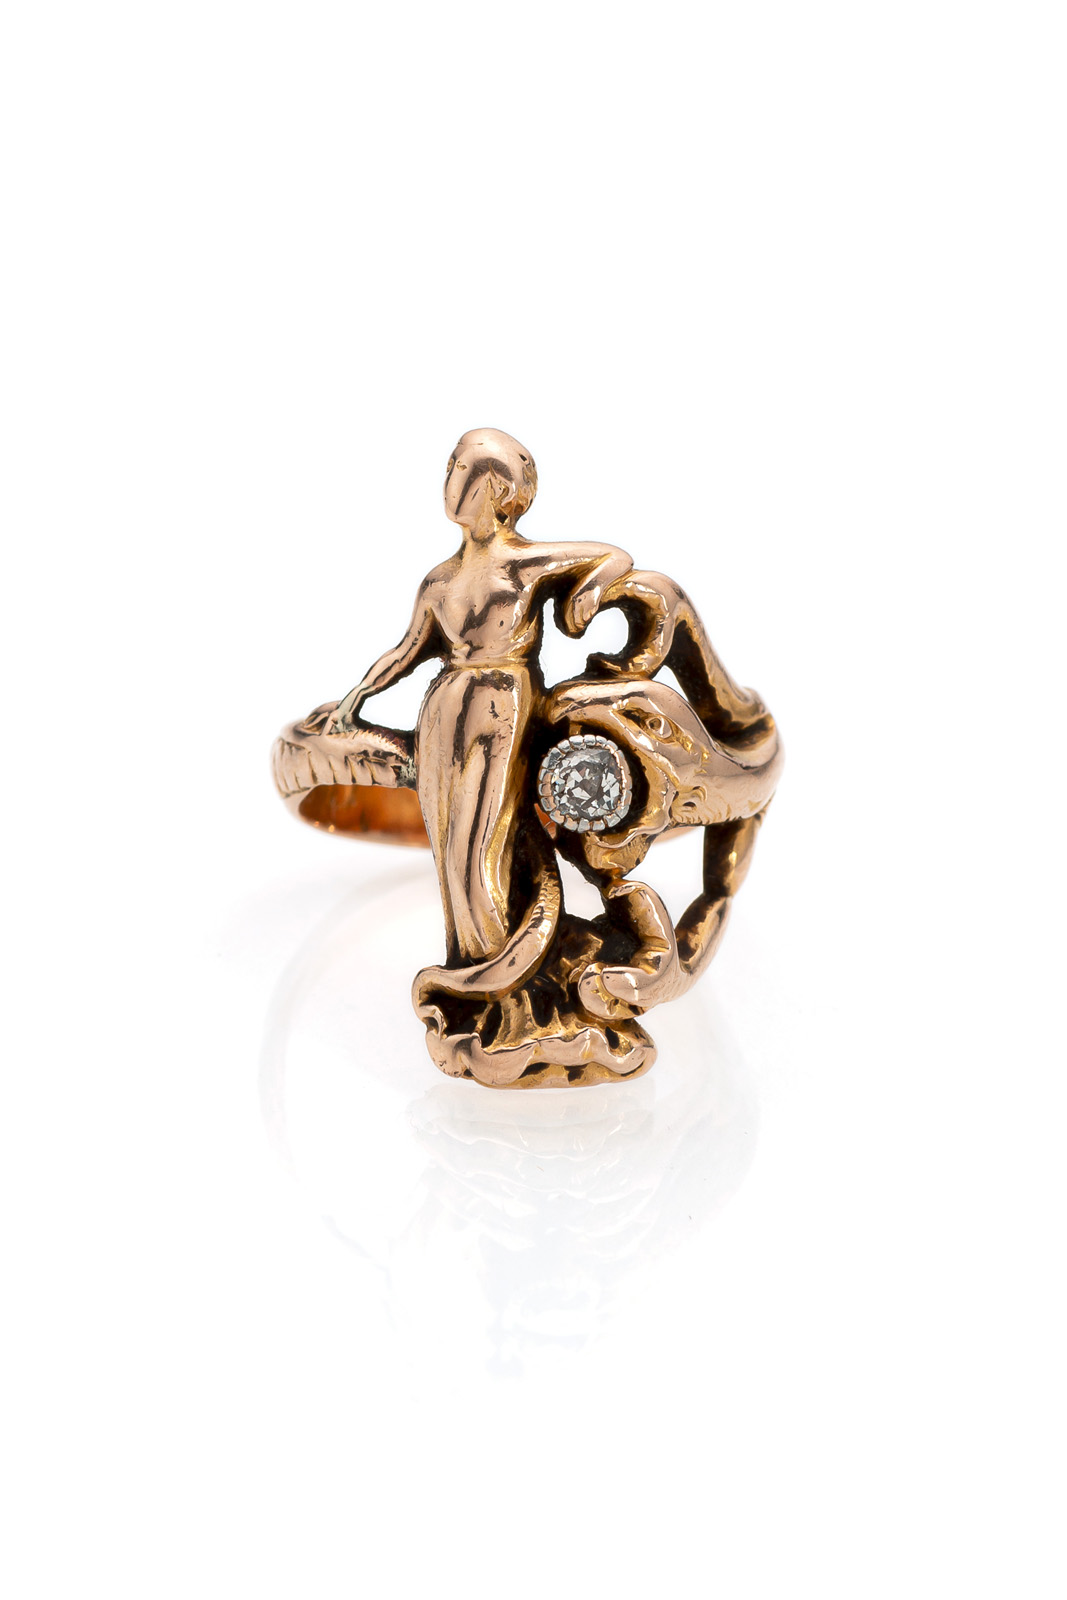 <b>AN ART NOUVEAU GOLD RING WITH EVE AND THE SNAKE</b>